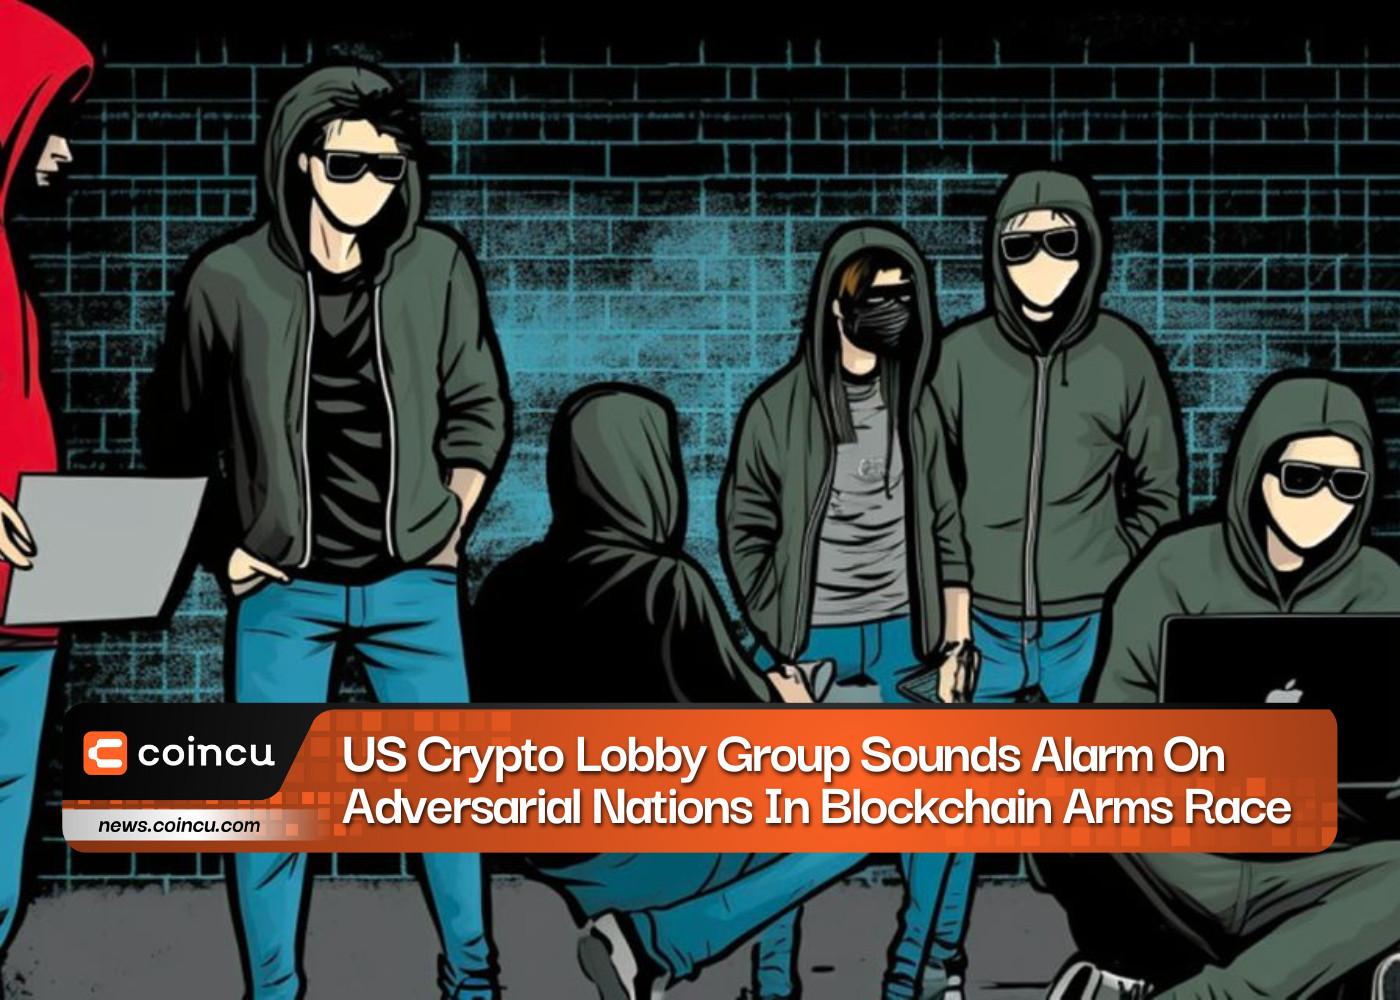 US Crypto Lobby Group Sounds Alarm On Adversarial Nations In Blockchain Arms Race